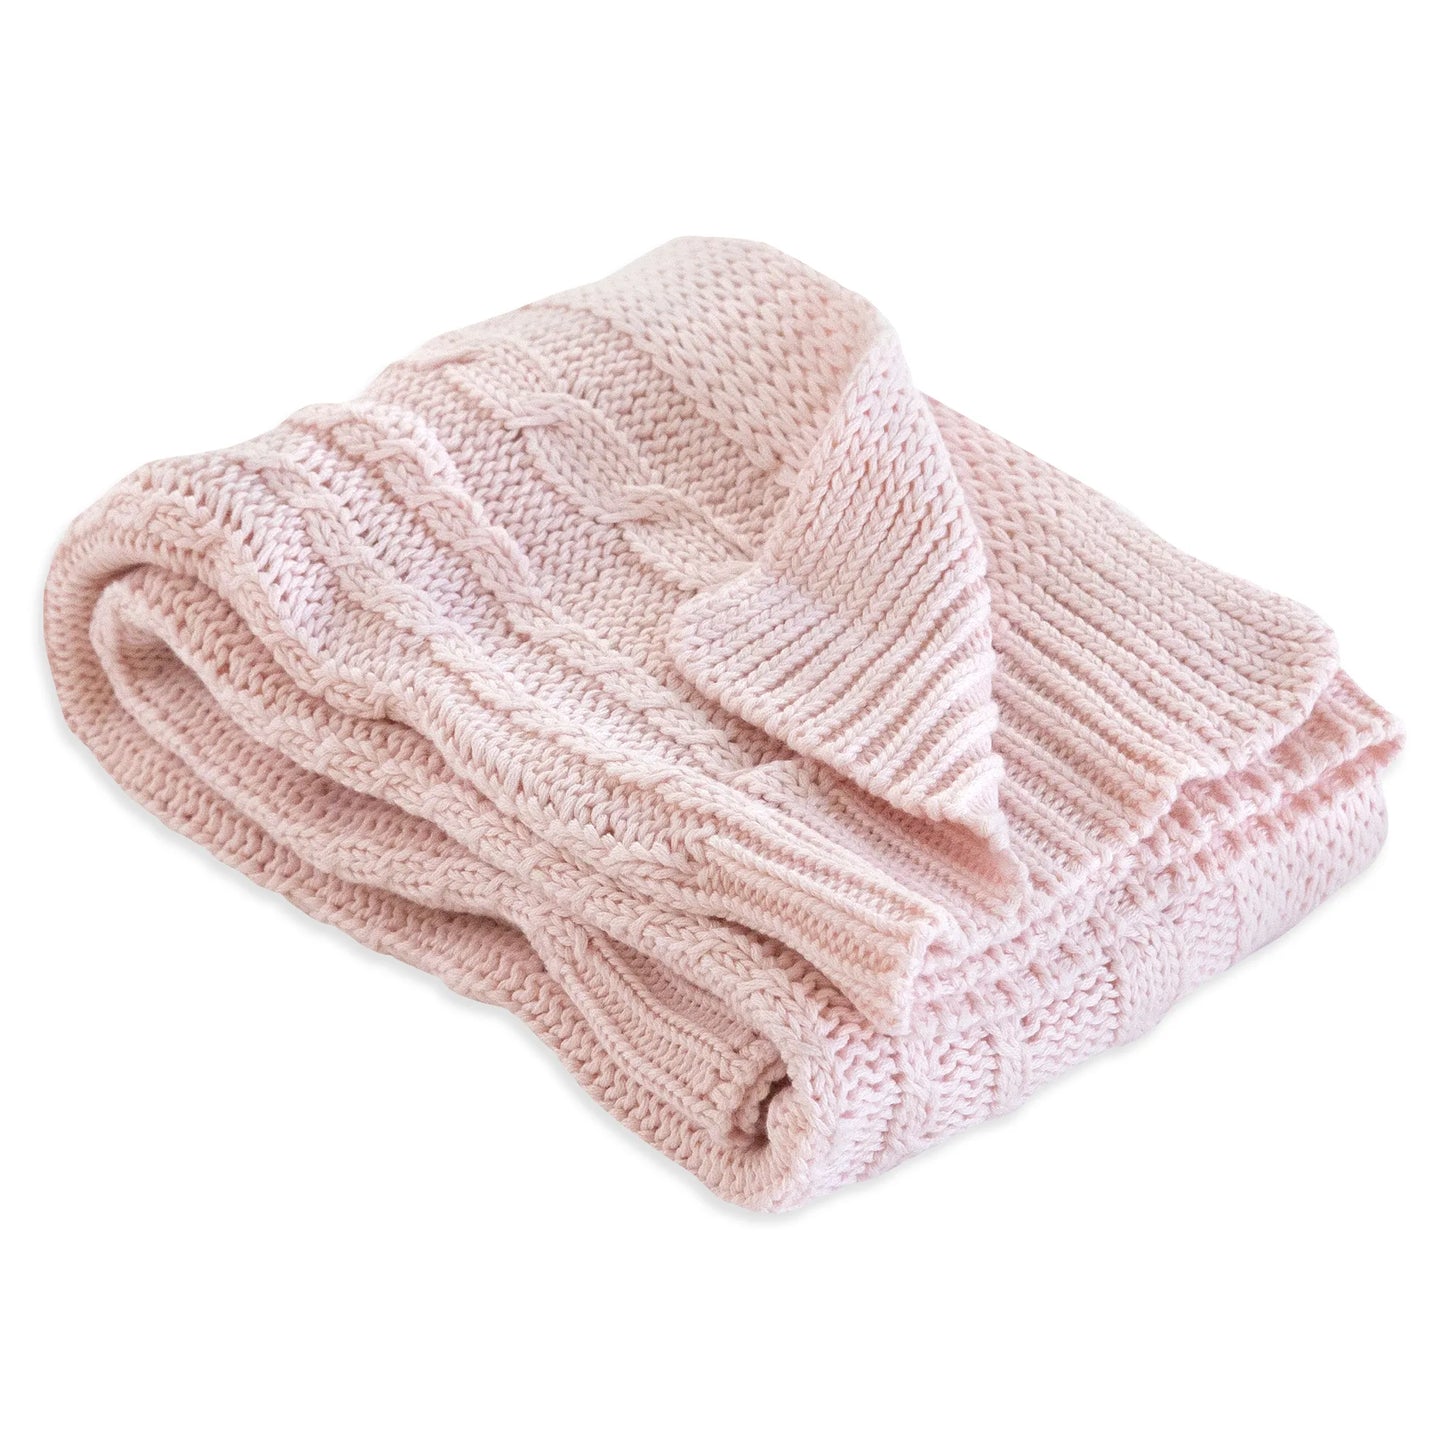 Organic Cotton Cable Knit Baby Blanket - Blossom